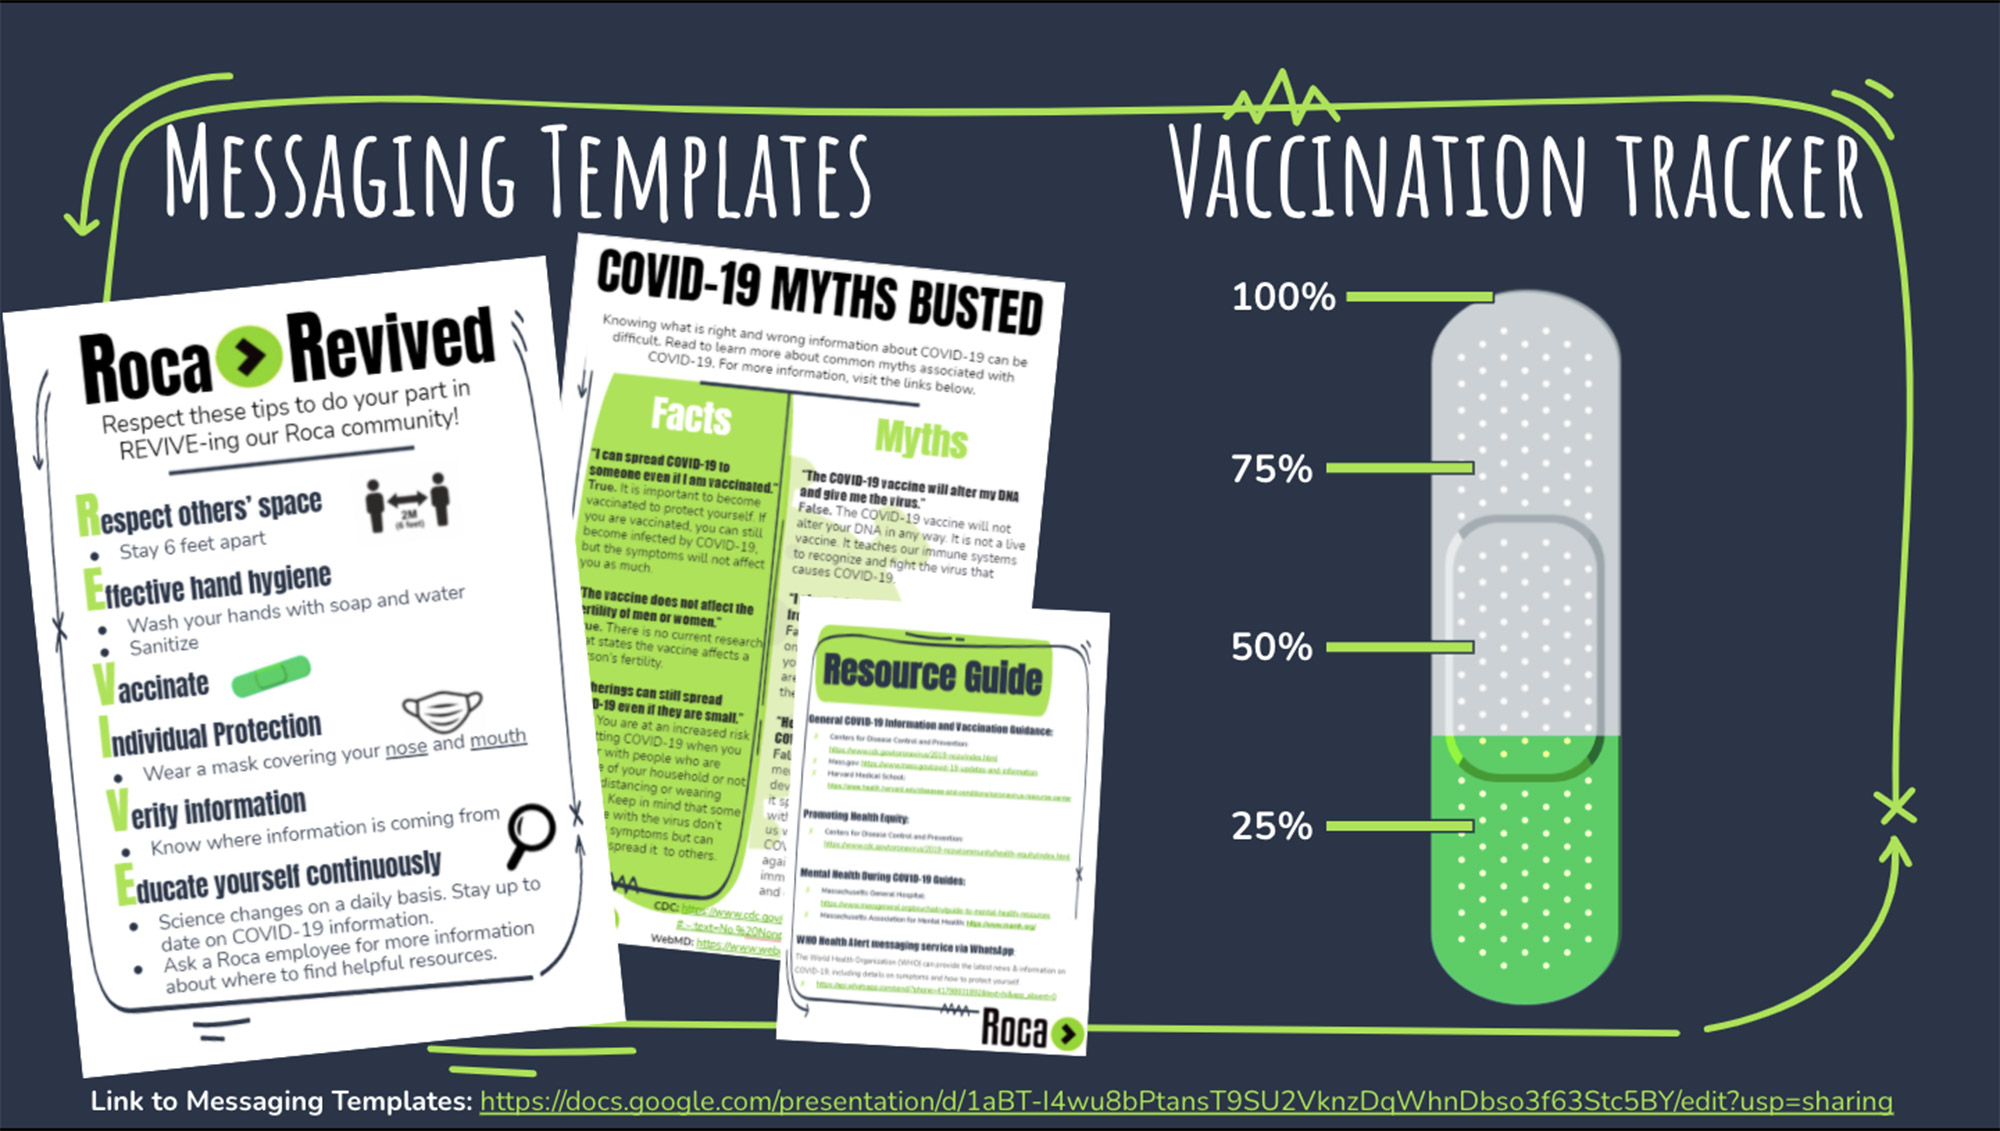 Slide from the team. It has a gray background and features graphic of a vaccination tracker, where a bandaid is filled to about 33% on the right. At left, are sample icons of messaging templates, including “Roca > Revived,” “COVID-19 Myths Busted,” and “Resource Guide”.